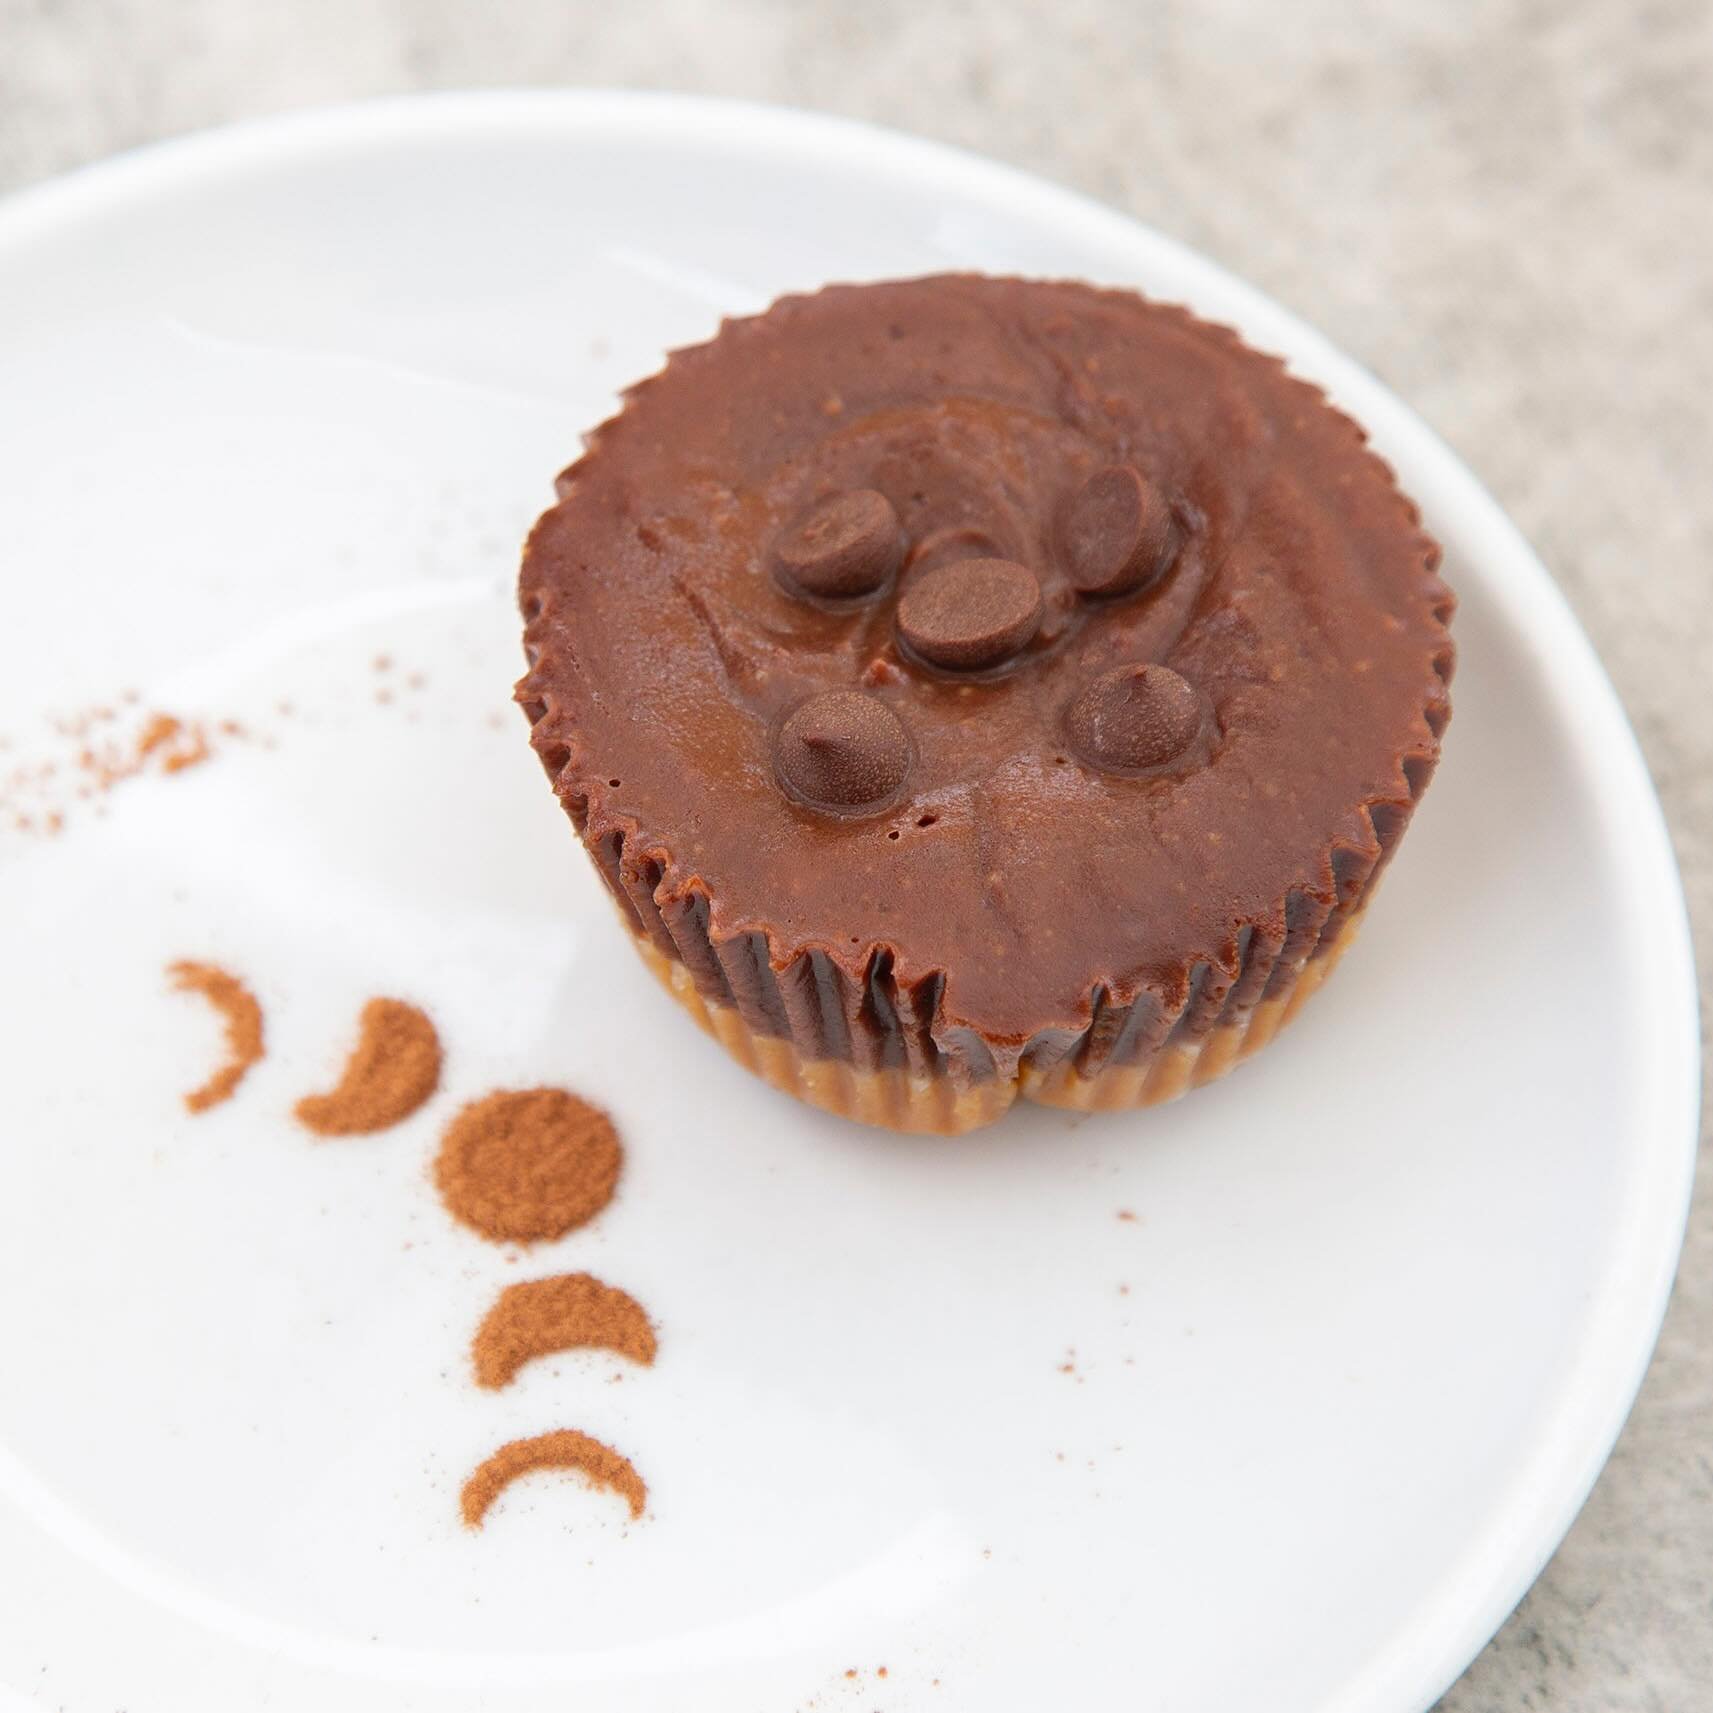 Treat yourself to our heavenly homemade Peanut Butter Cup! 🥜🍫✨ Crafted with love and packed with wholesome ingredients like creamy peanut butter, rich cacao, and pure maple syrup, every bite is a decadent delight. Plus, our rooftop Cafe is 100% org